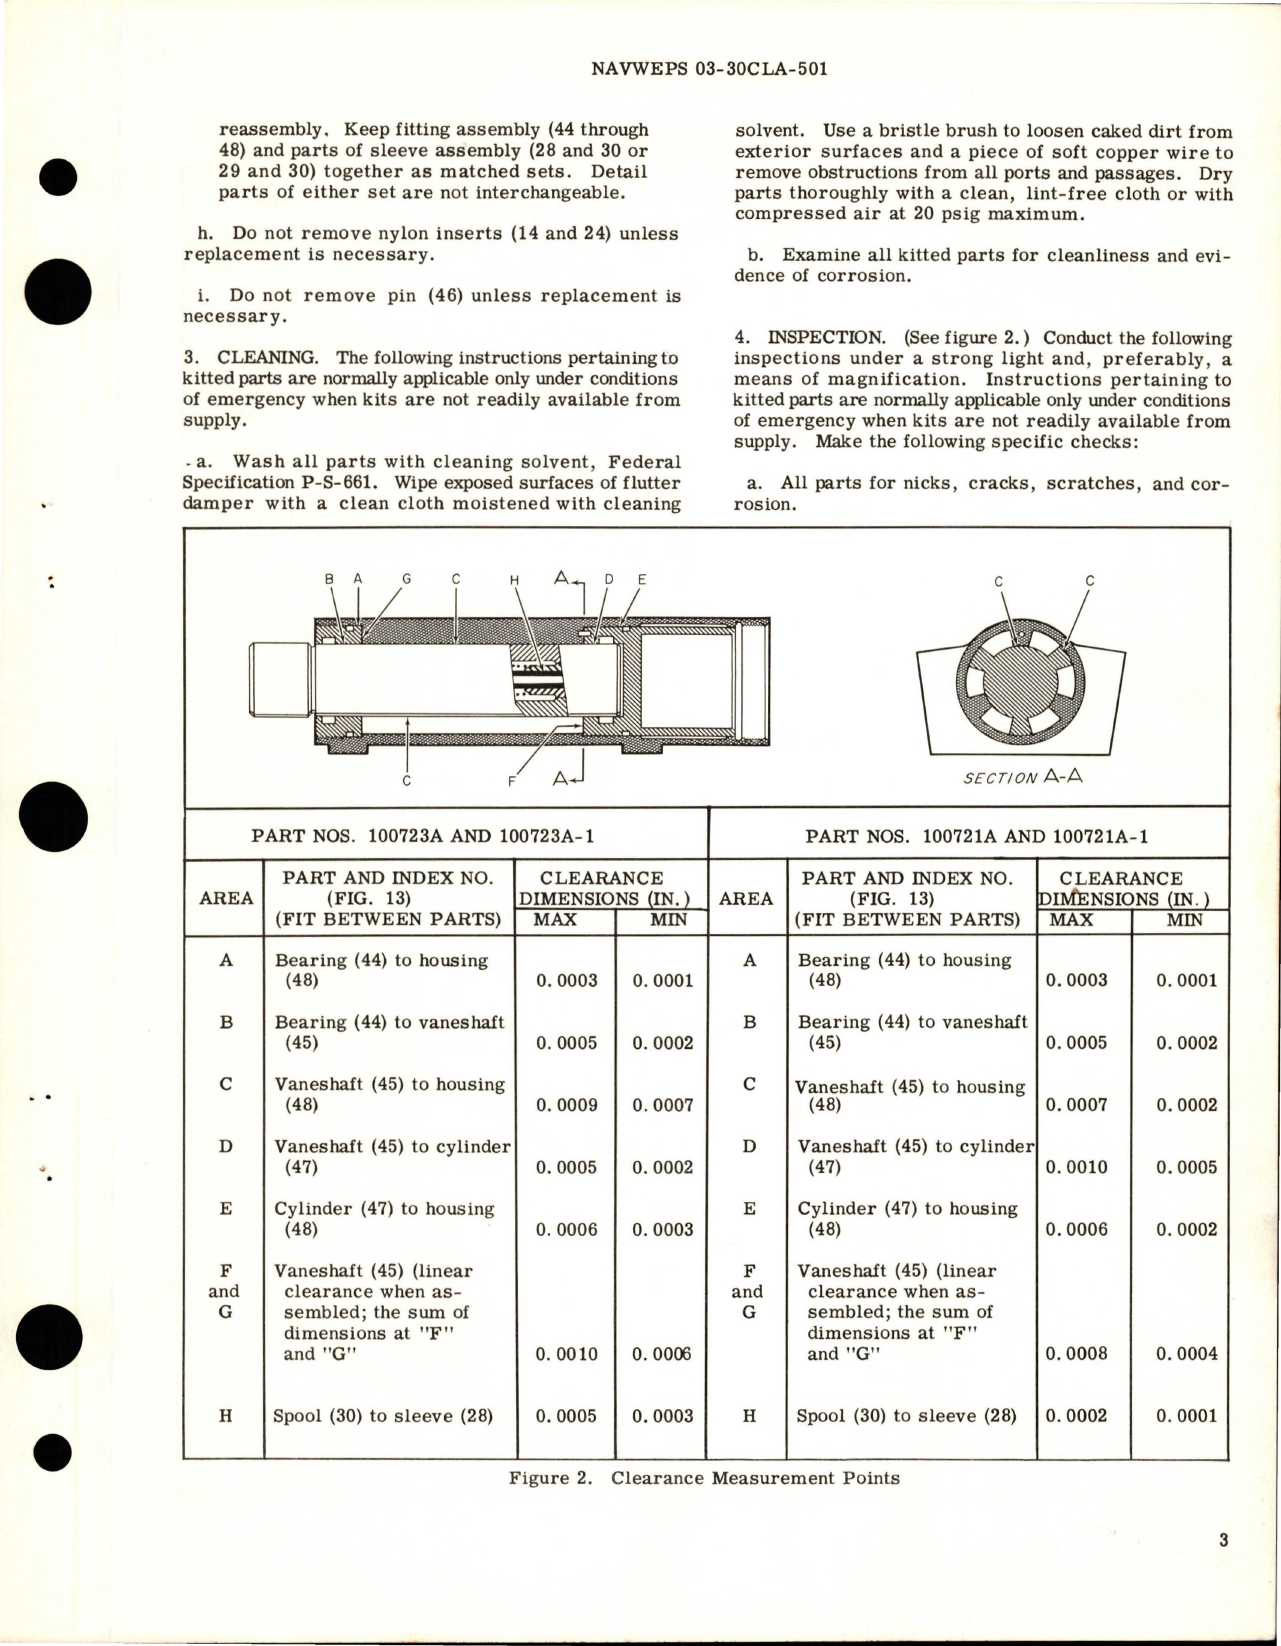 Sample page 5 from AirCorps Library document: Overhaul Instructions with Parts Breakdown for Flutter Dampers - Parts 100721, 100723, 100721A, 100723A, 100721A-1 & 100723A-1